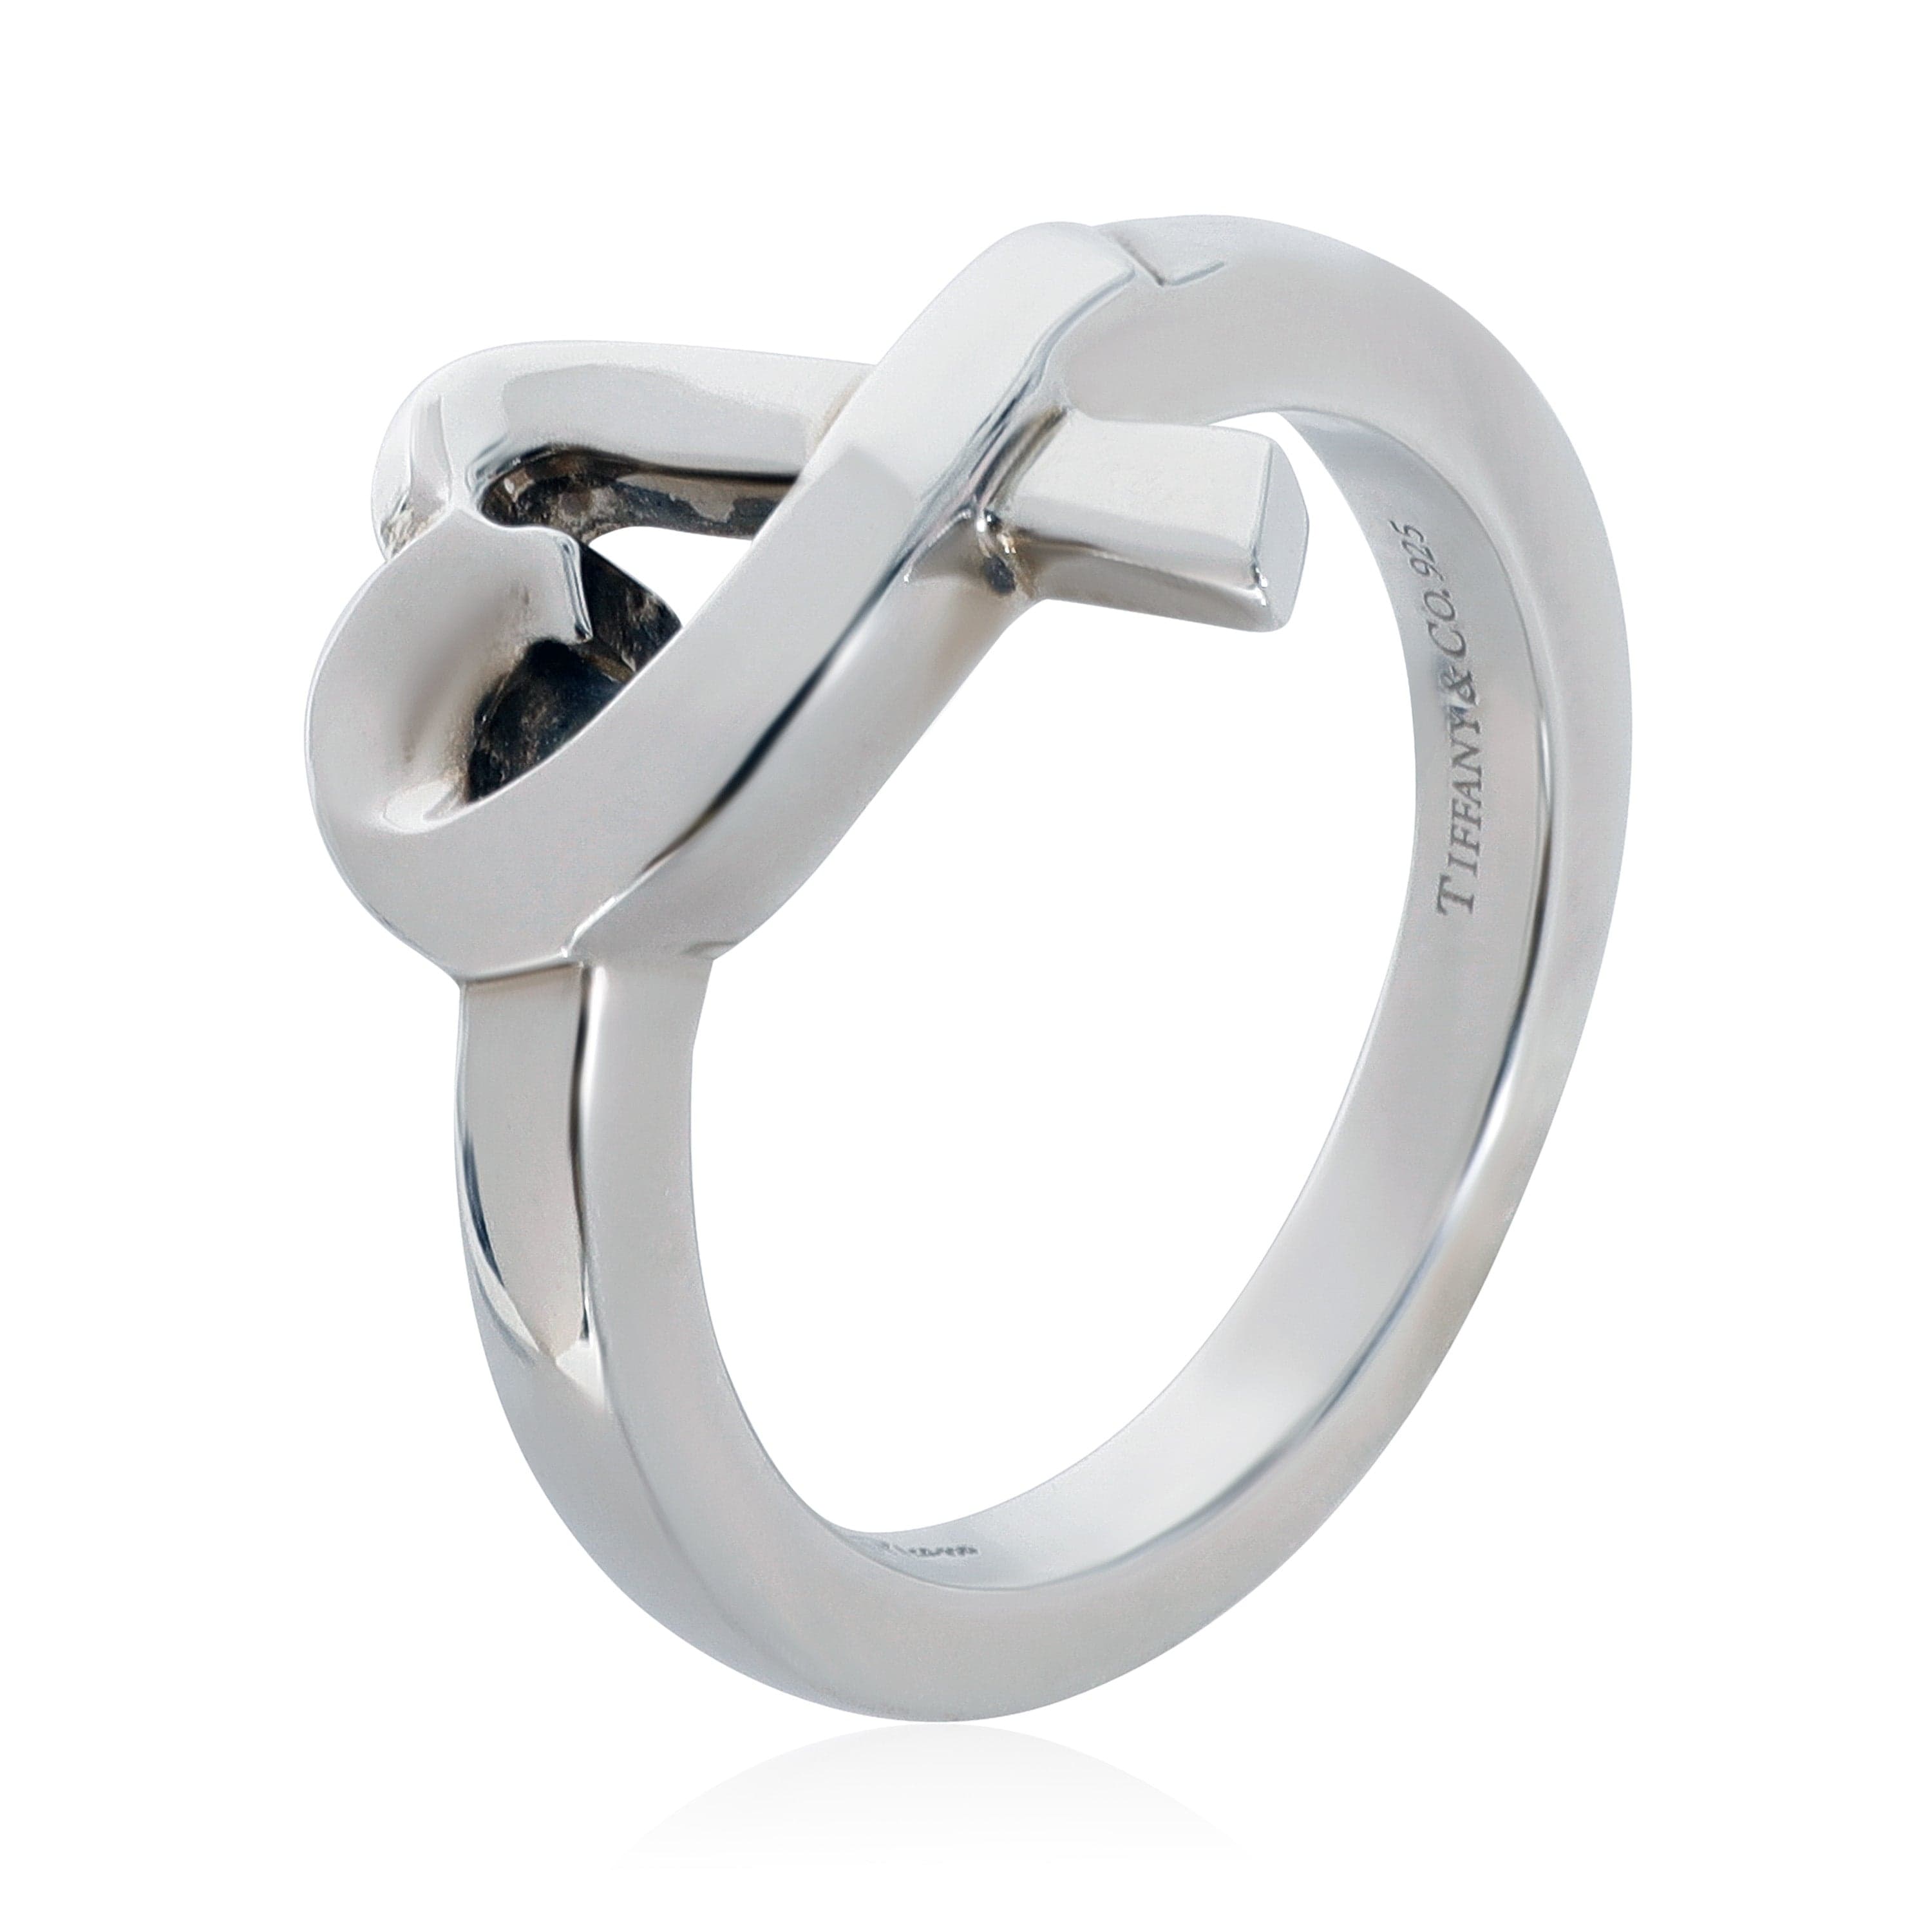 Tiffany & Co. Tiffany & Co. Paloma Picasso Loving Heart Ring in Sterling Silver